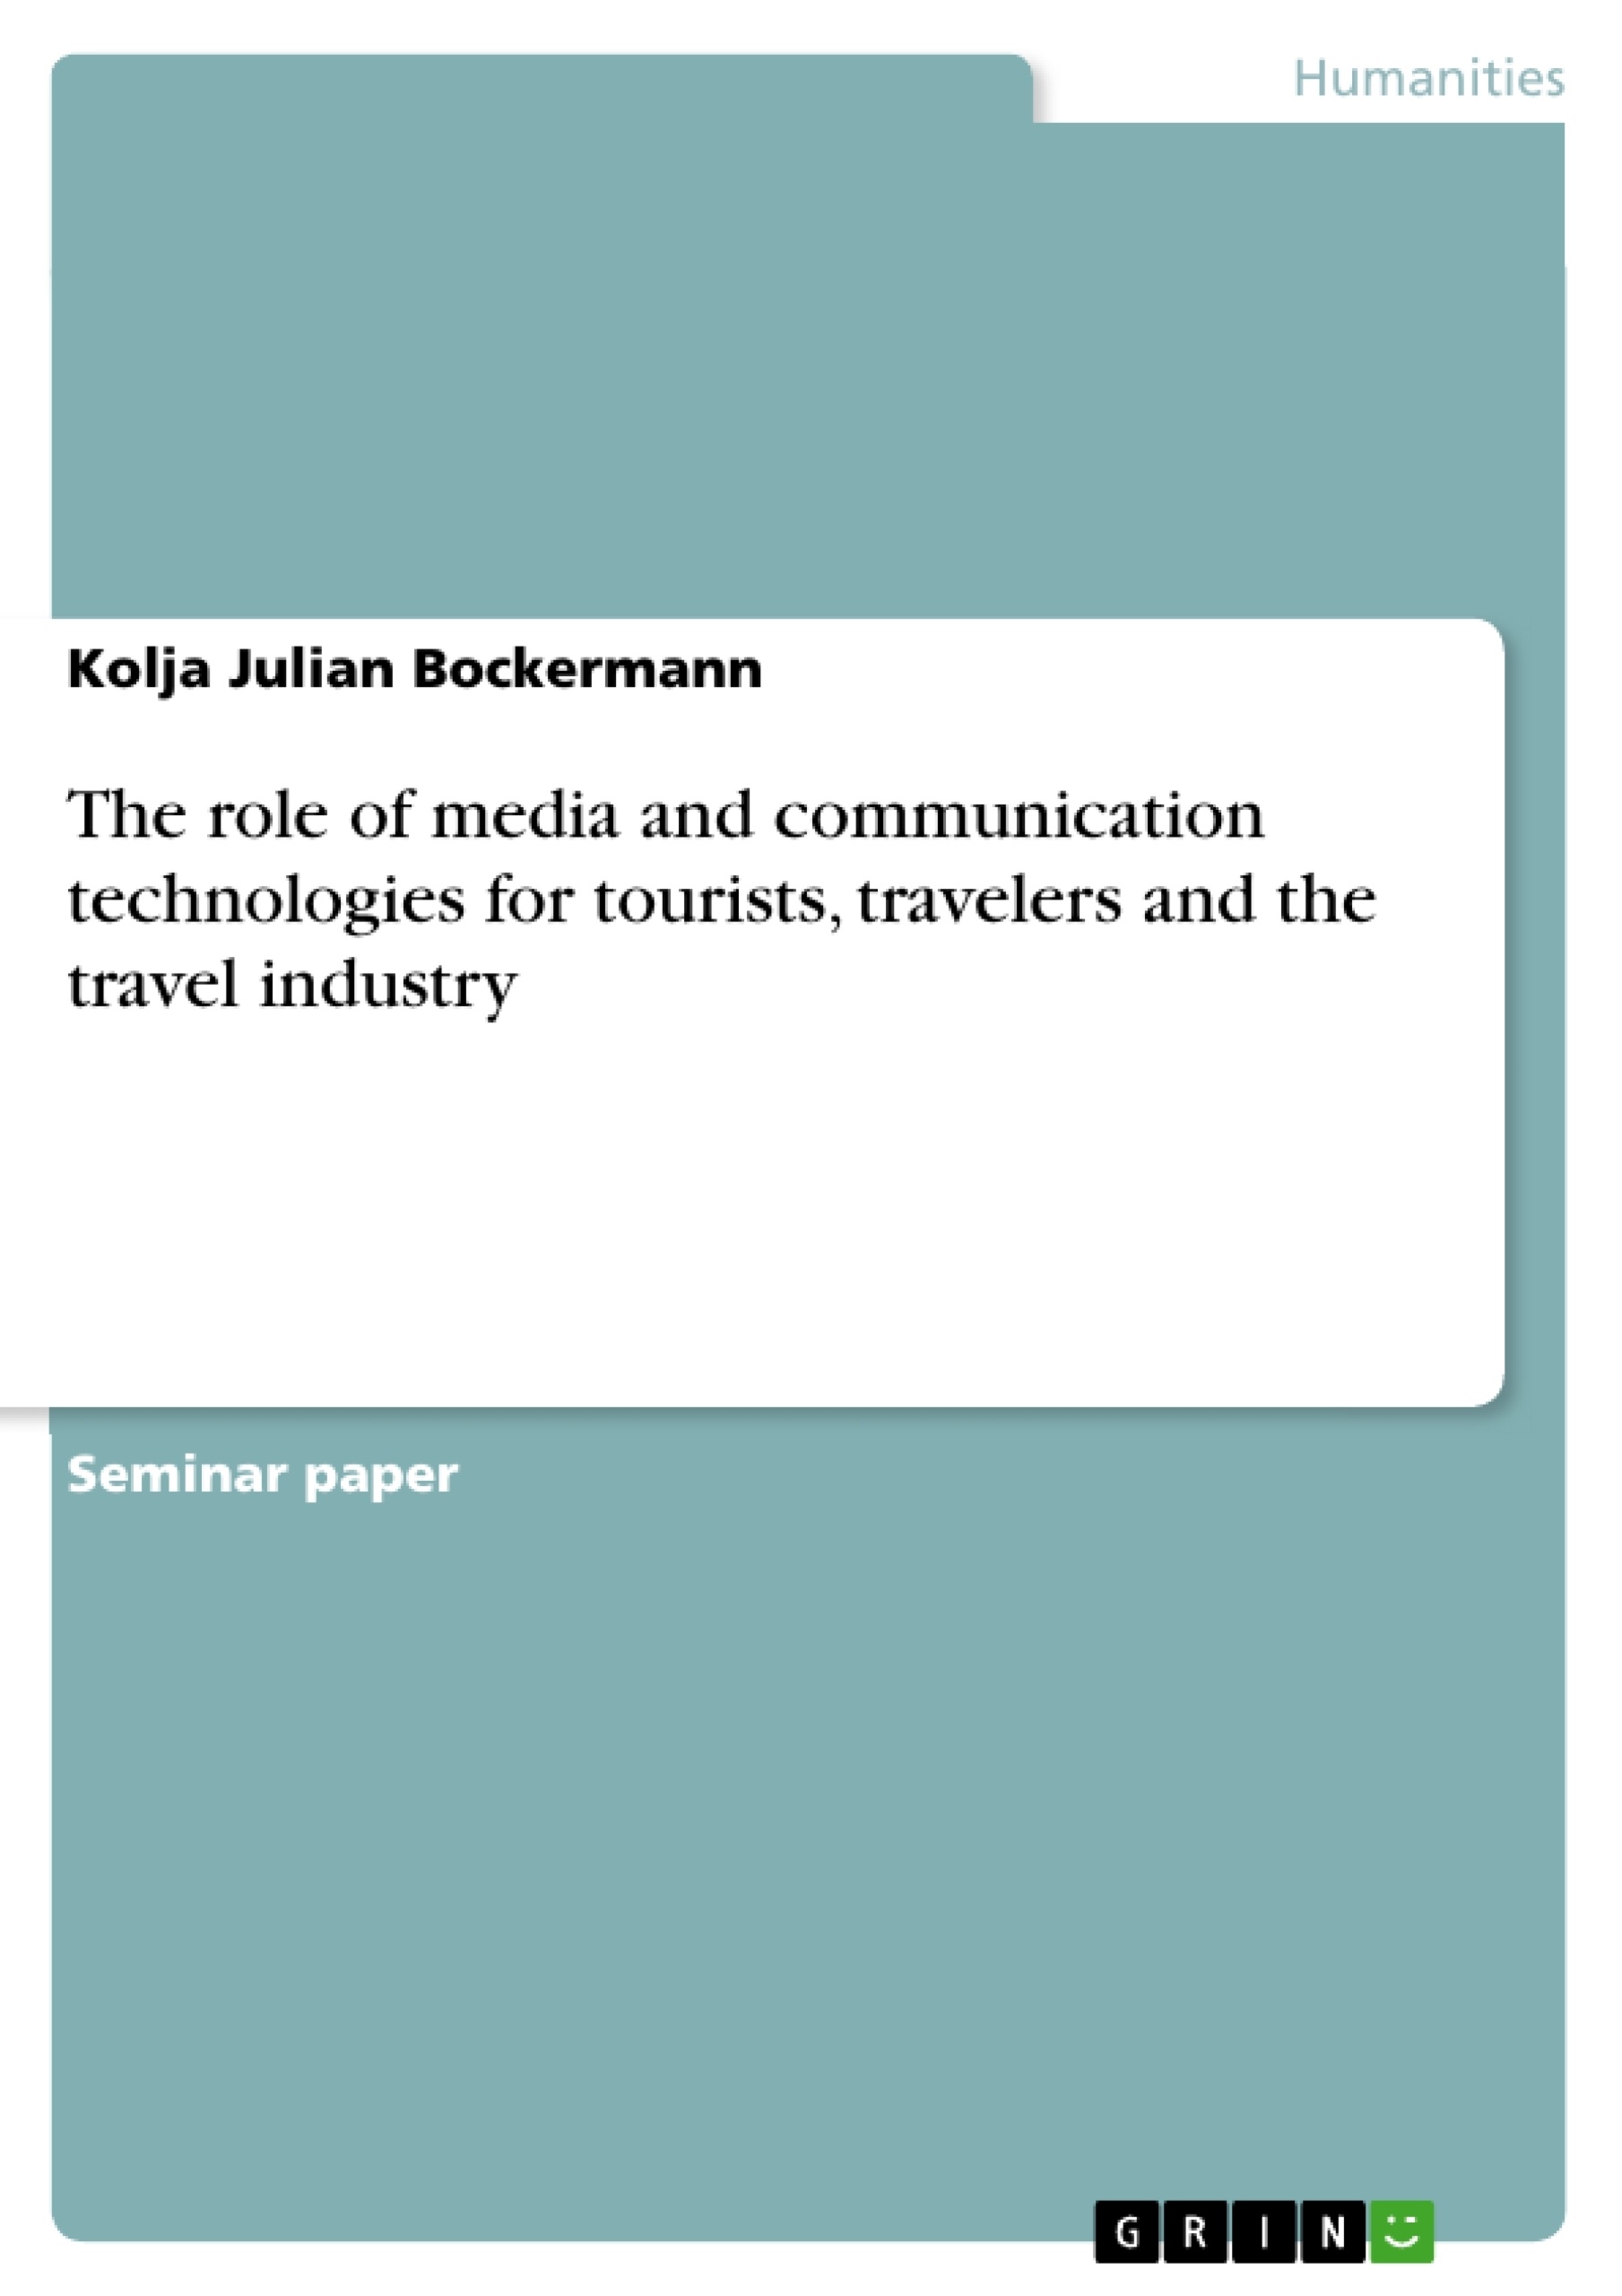 Título: The role of media and communication technologies for tourists, travelers and the travel industry